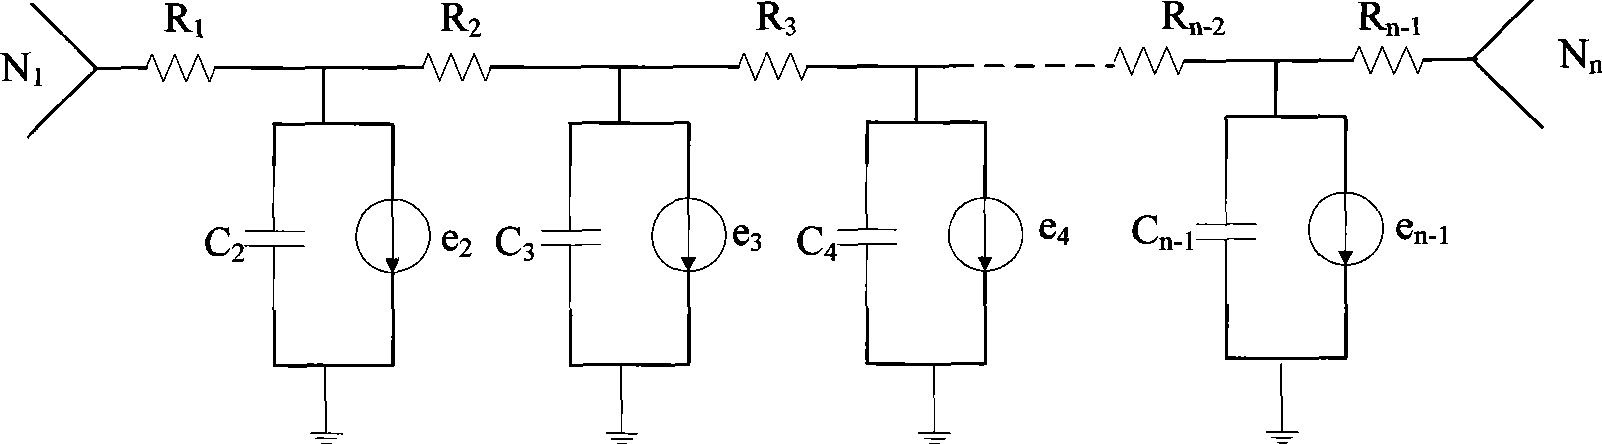 Evaluation method for decoupling capacitor on ASIC sheet based on chain circuit